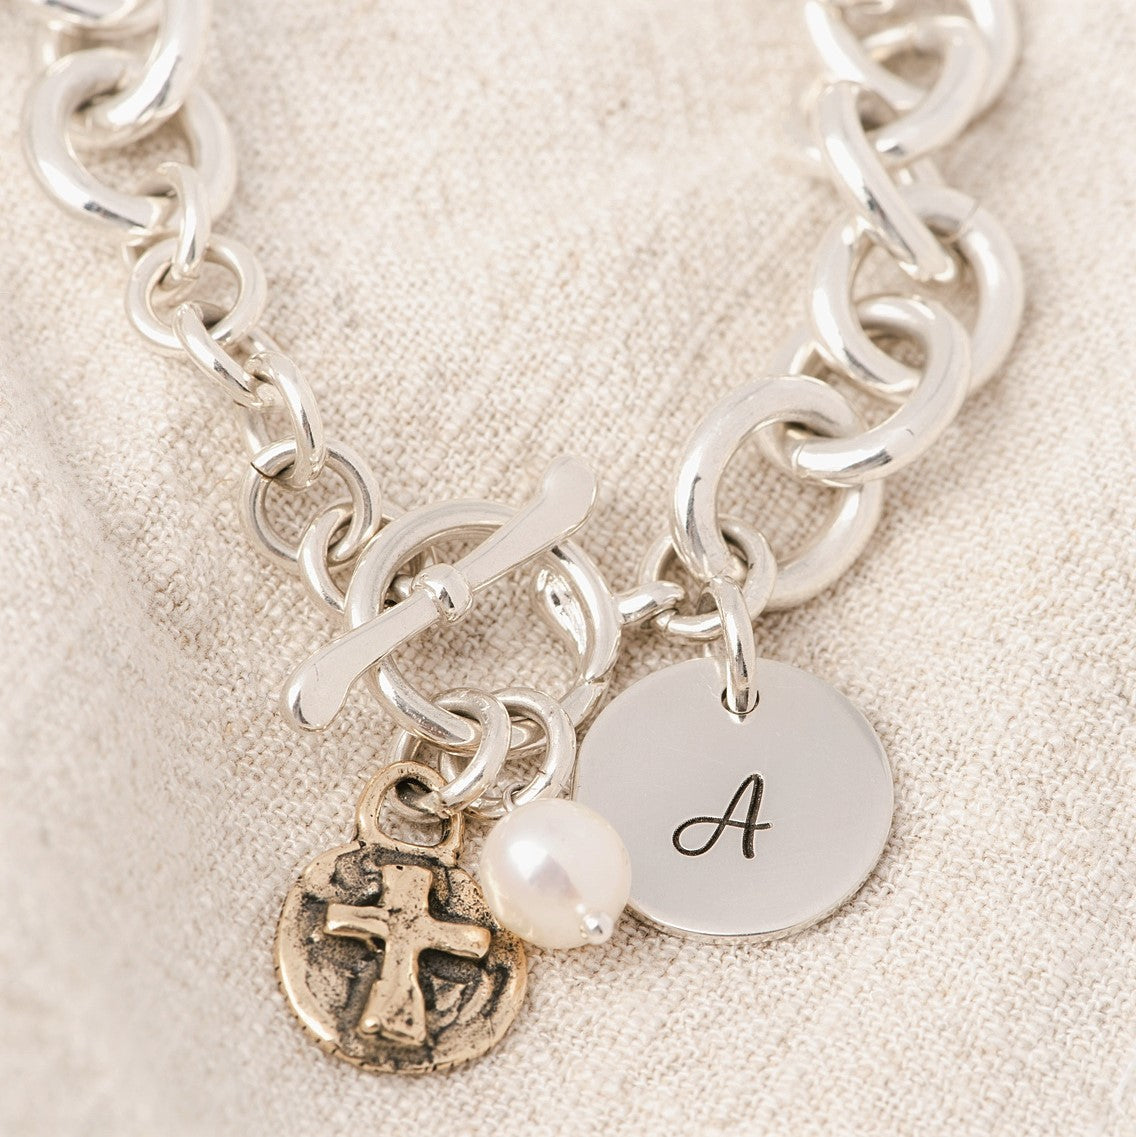 Sterling Silver Link Charm Bracelet | Initial Disc, Bronze Cross & Freshwater Pearl Charms 7.5 (Average)